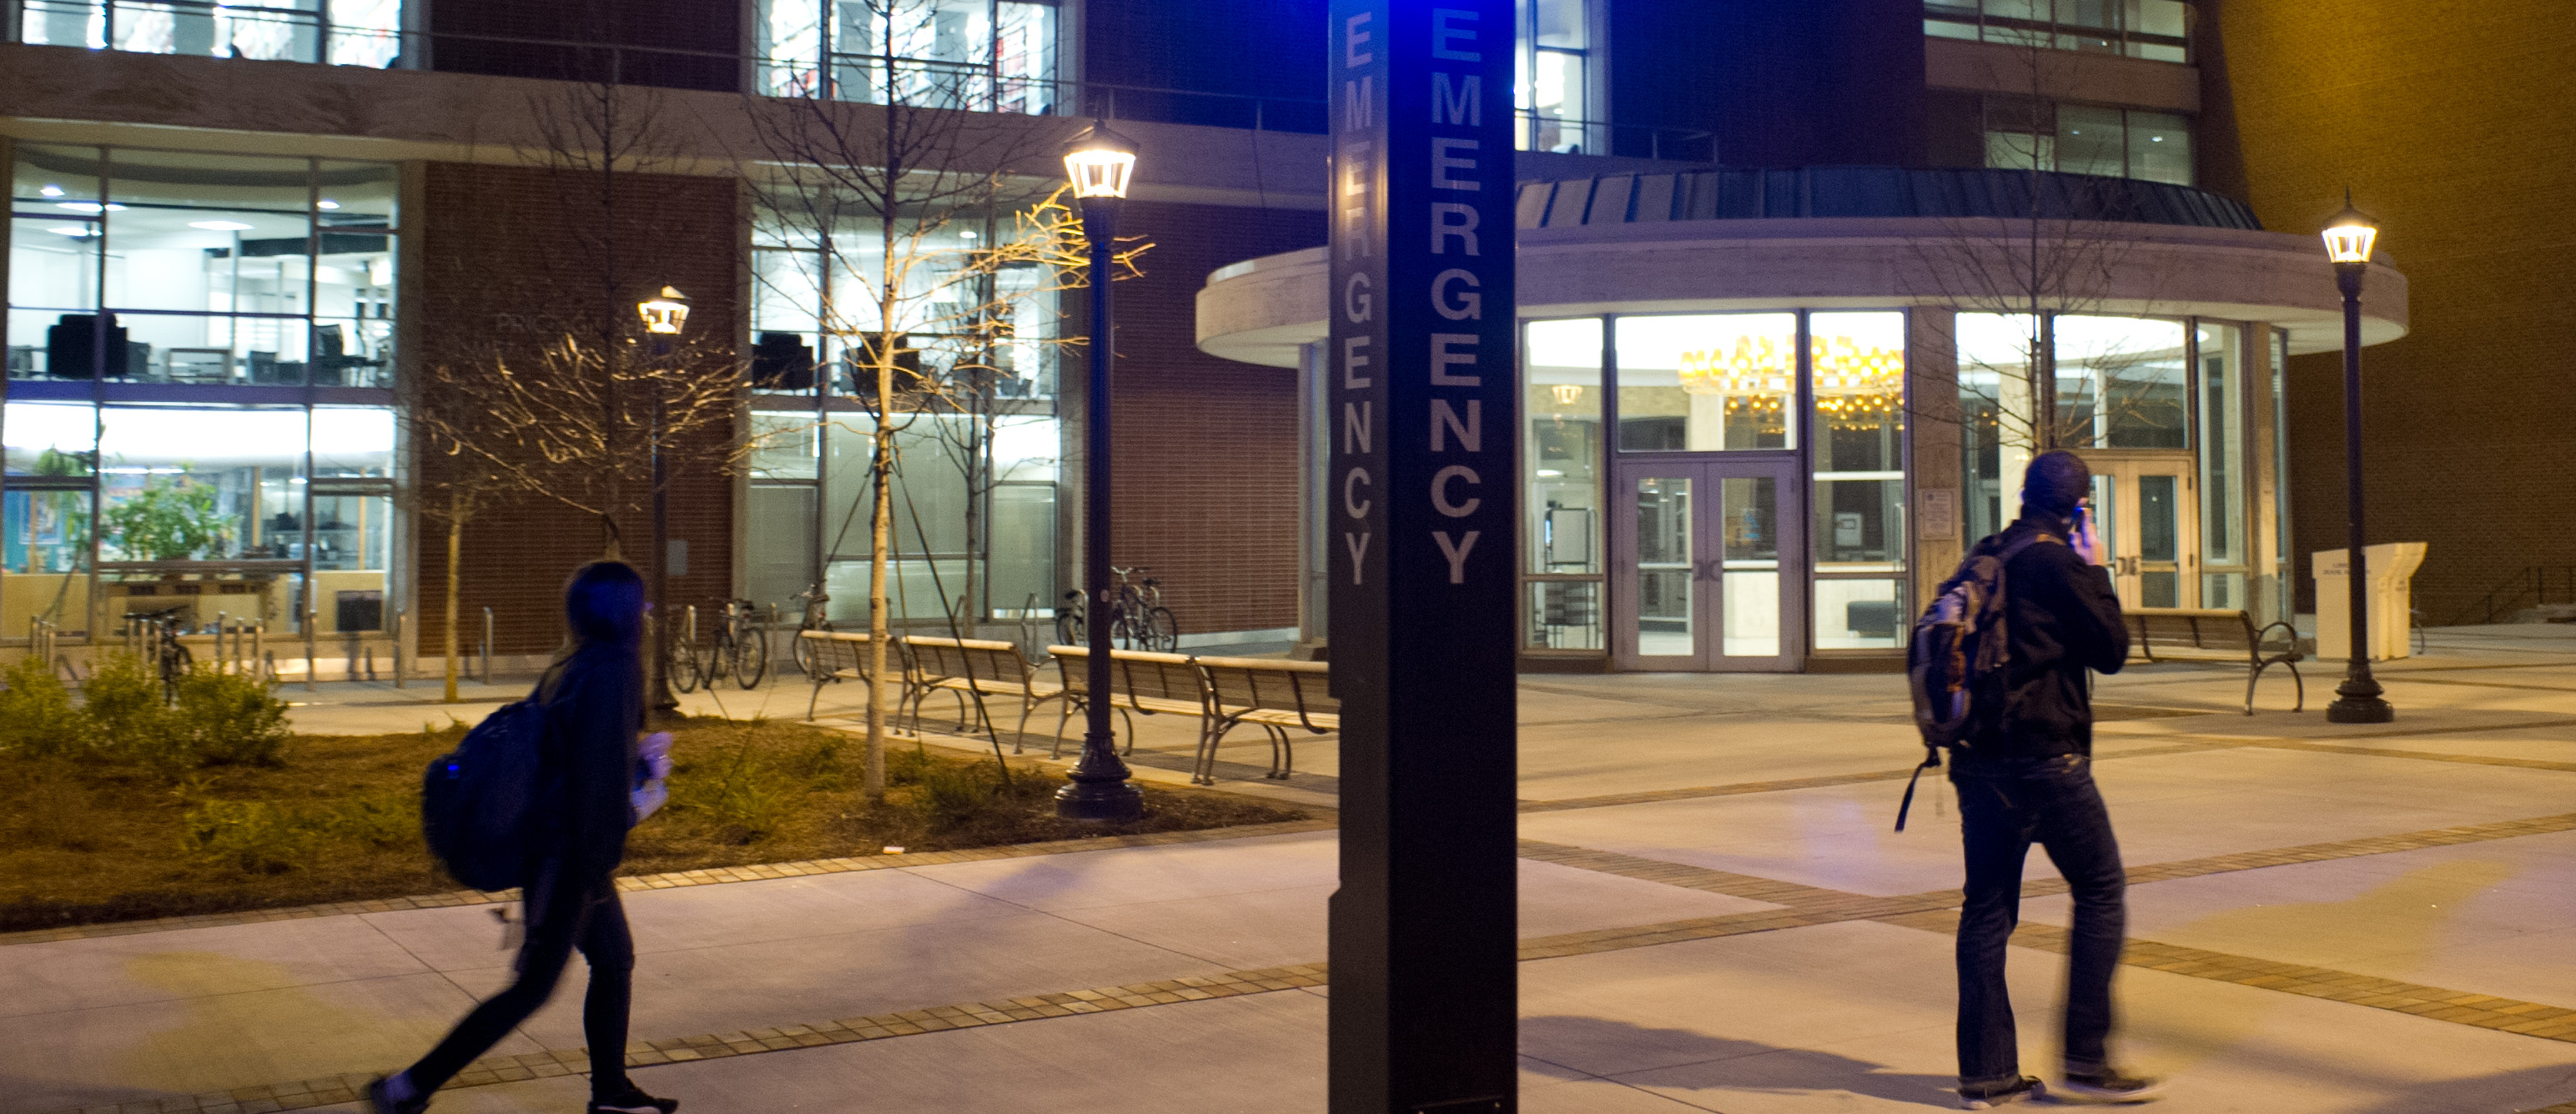 Photo of campus at night featuring an Emergency pole sign.